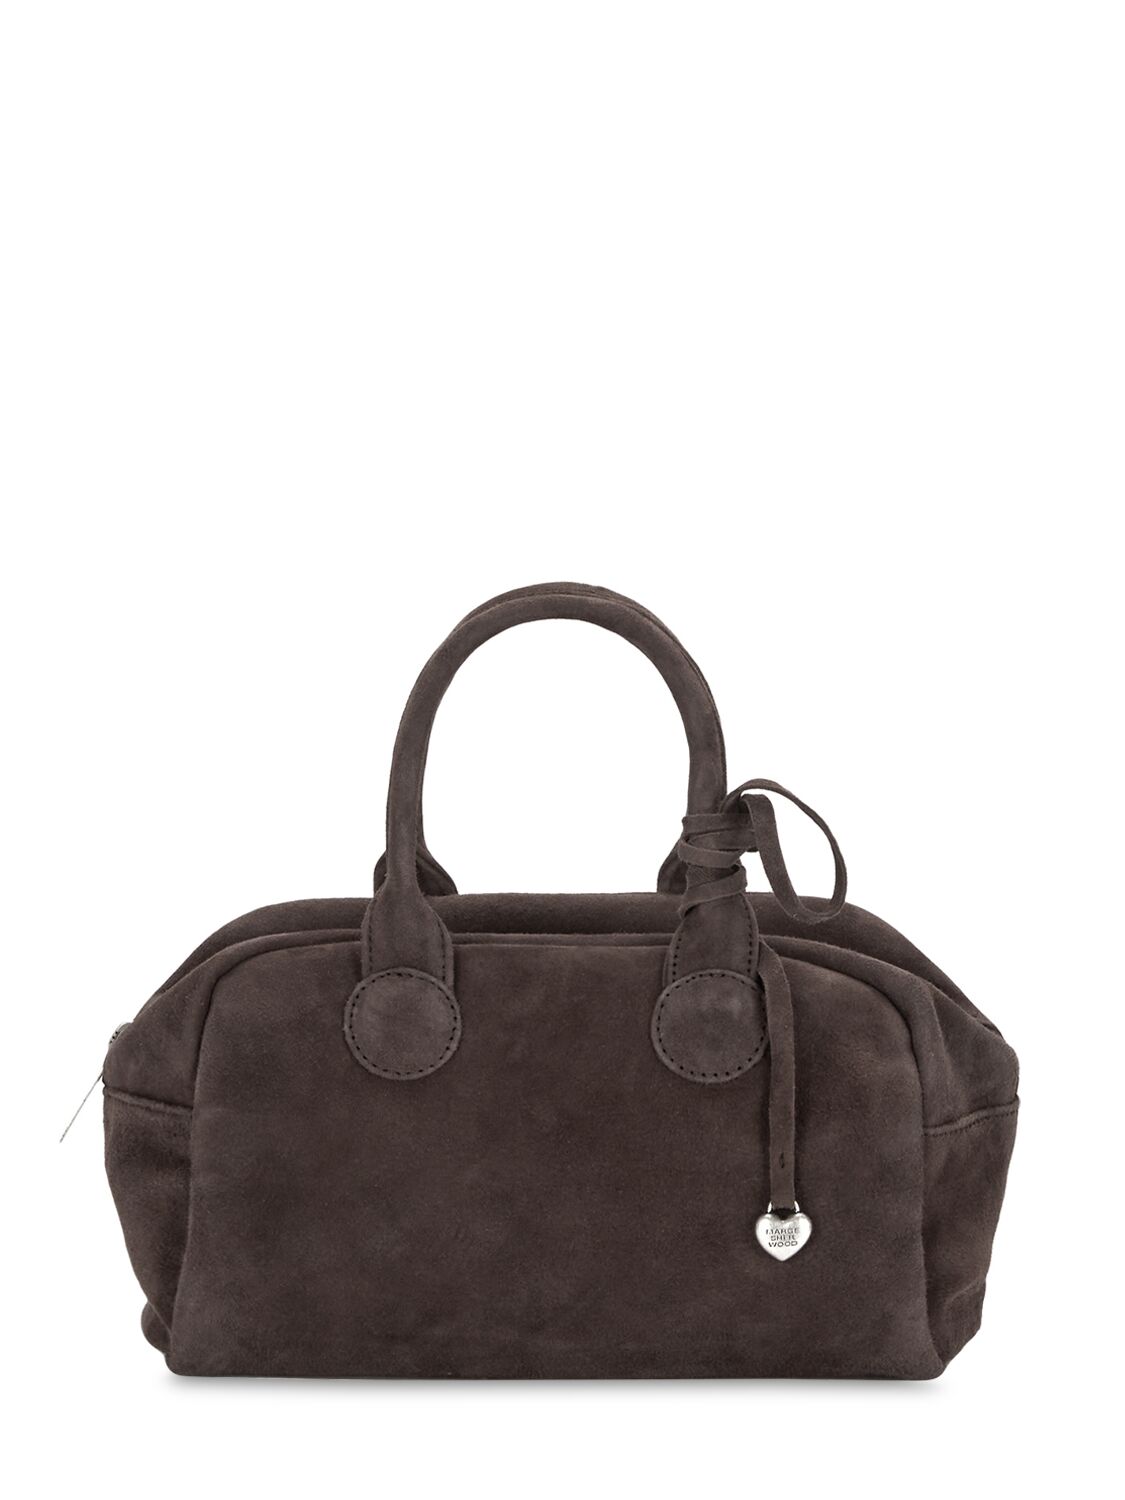 Marge Sherwood Bowling Soft Suede Top Handle Bag In Choco Brown